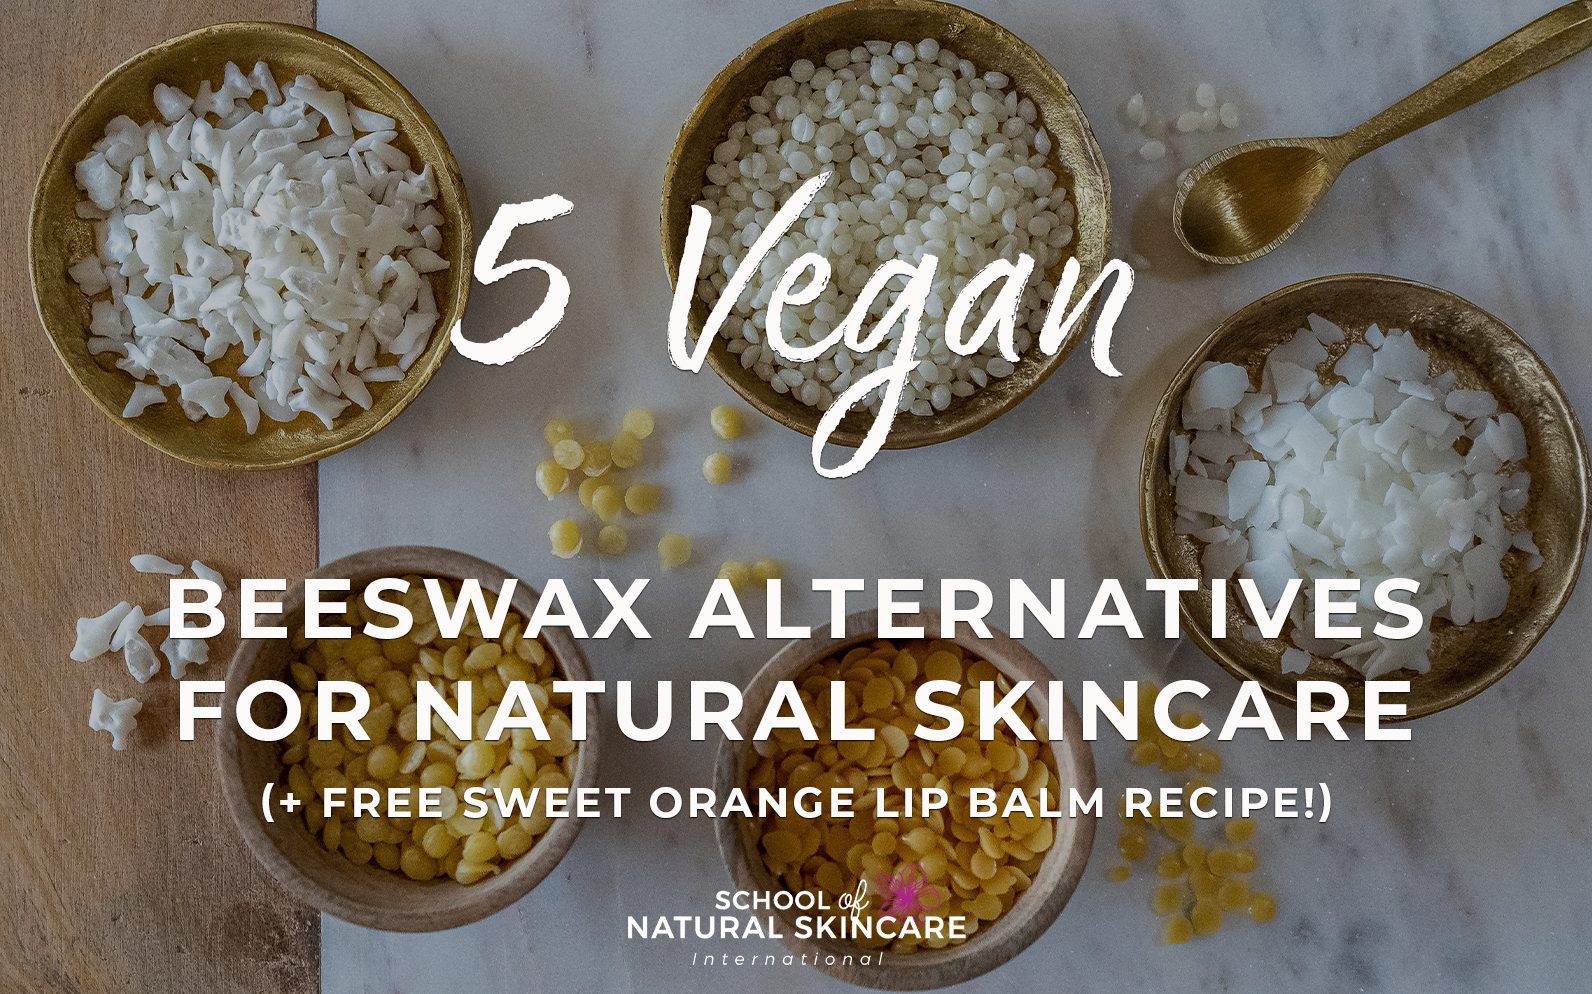 5 Vegan Beeswax Alternatives for Natural Skincare (+ Free Sweet